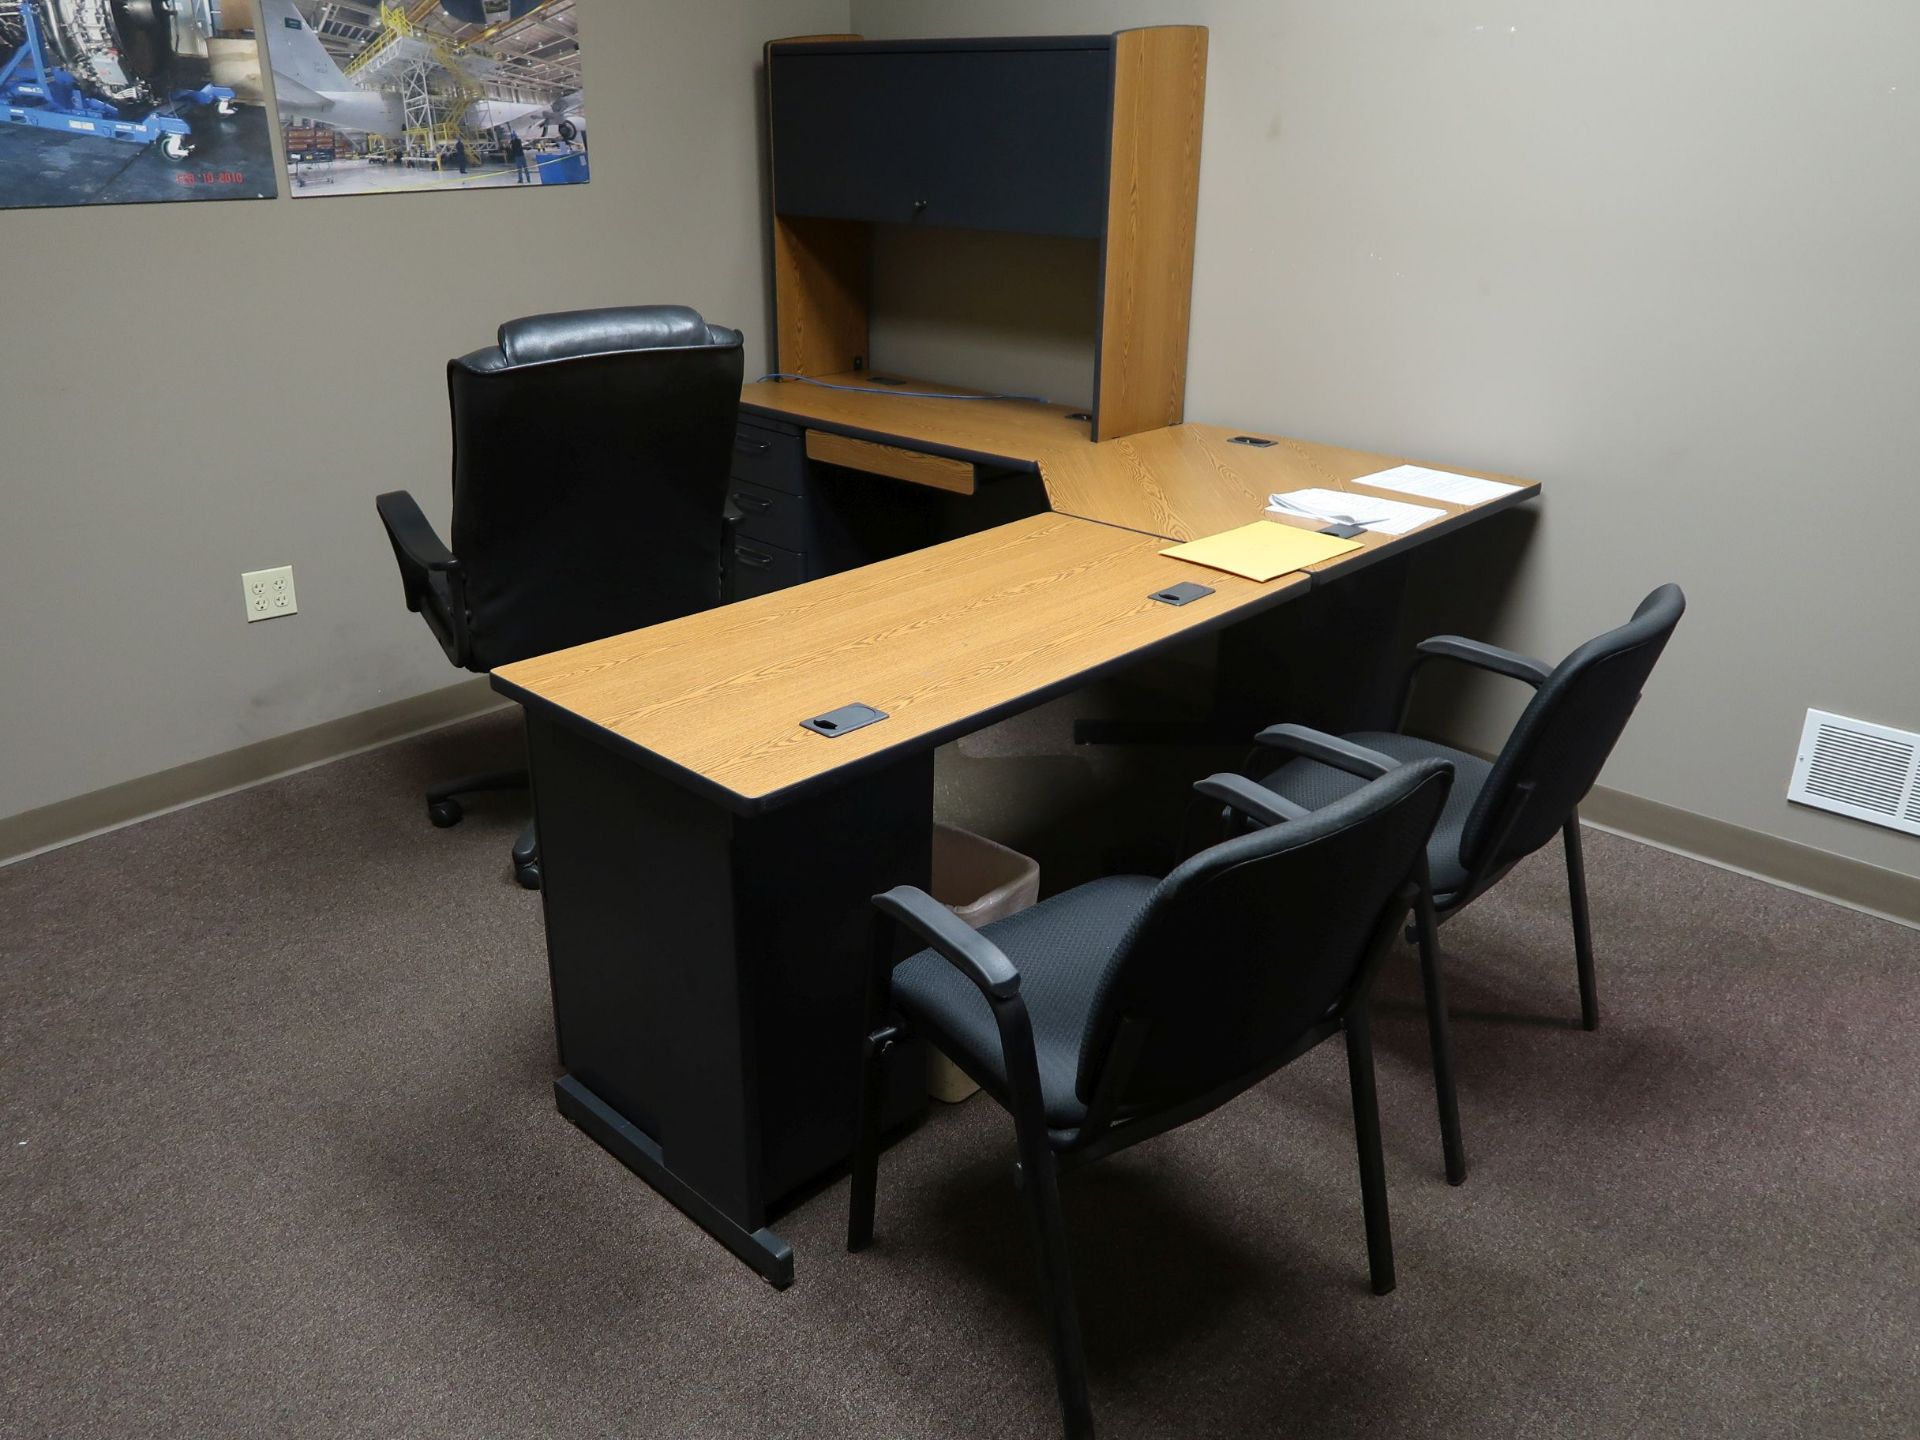 (LOT) CONTENTS OF OFFICE - MISCELLANEOUS FURNITURE